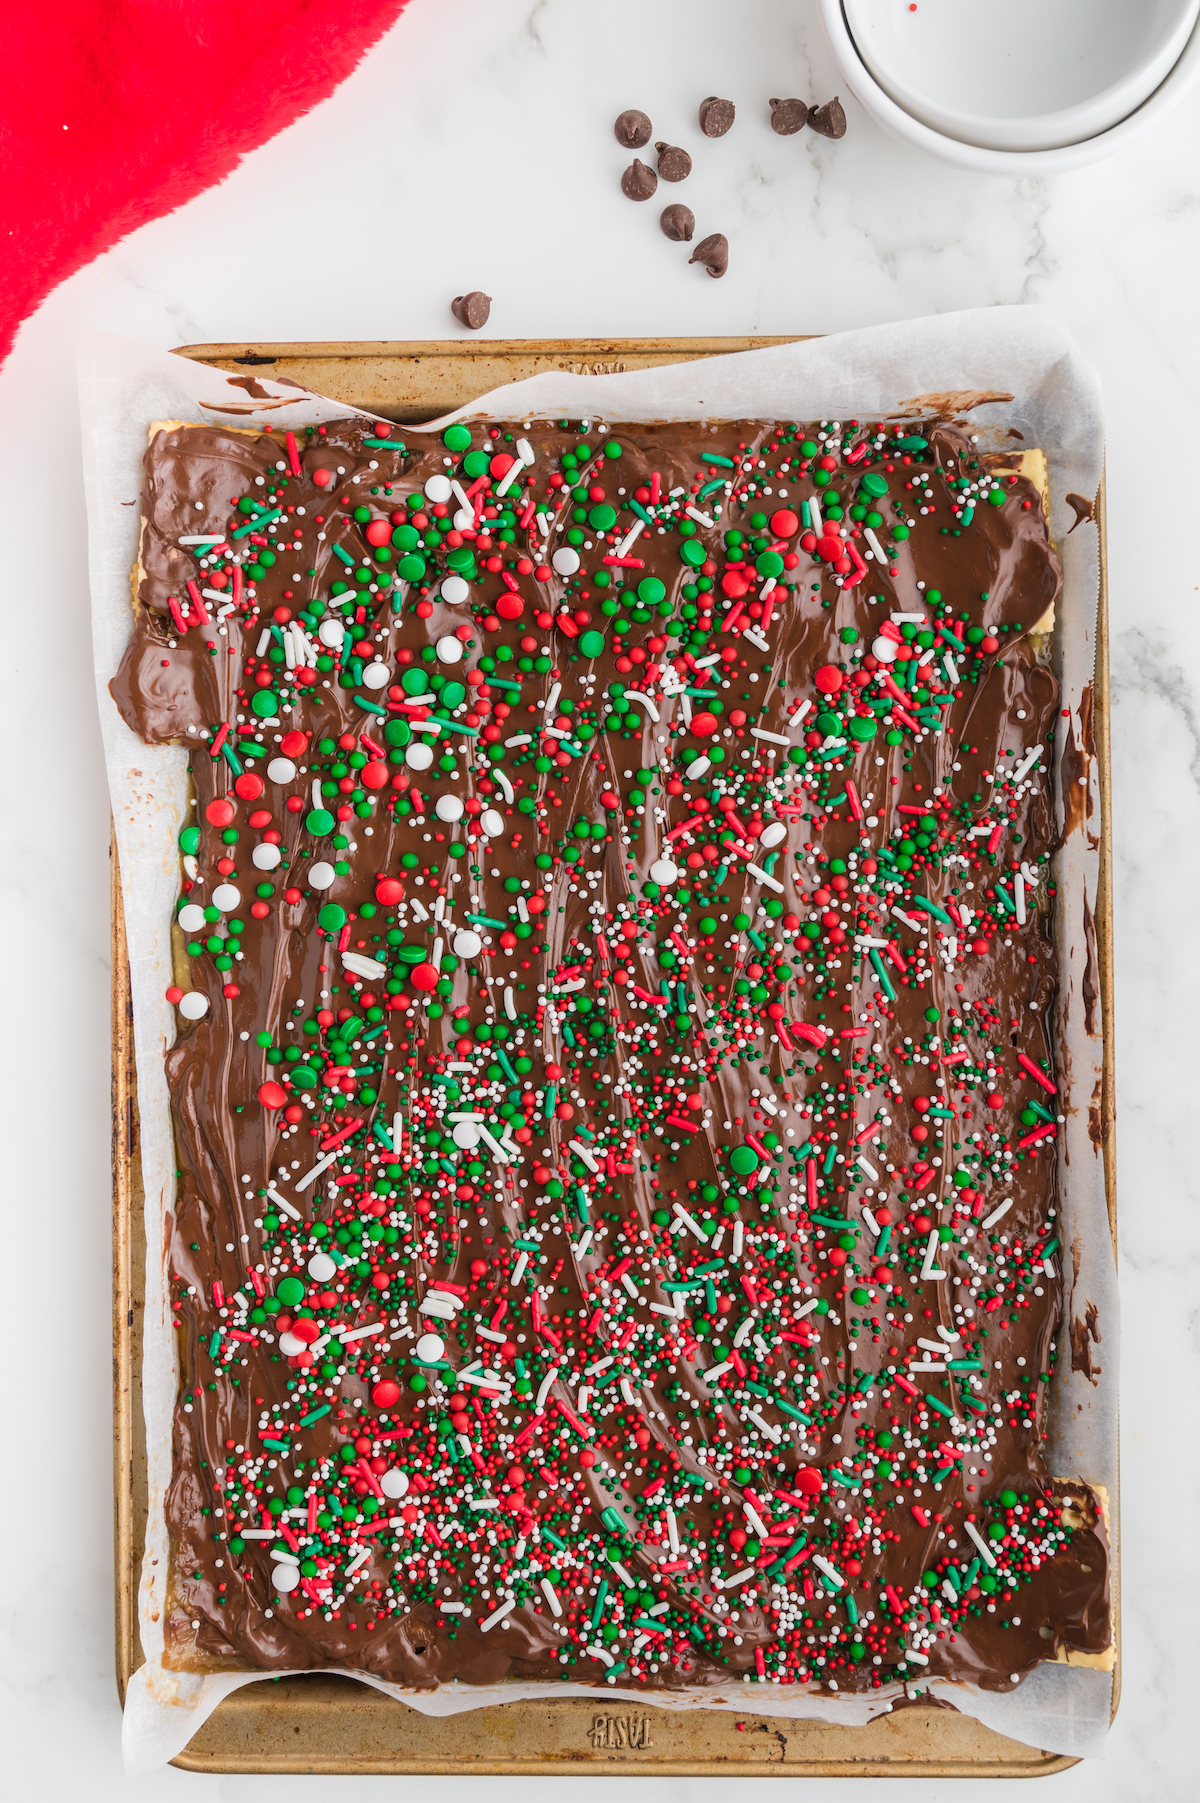 Christmas sprinkles added to the wet chocolate